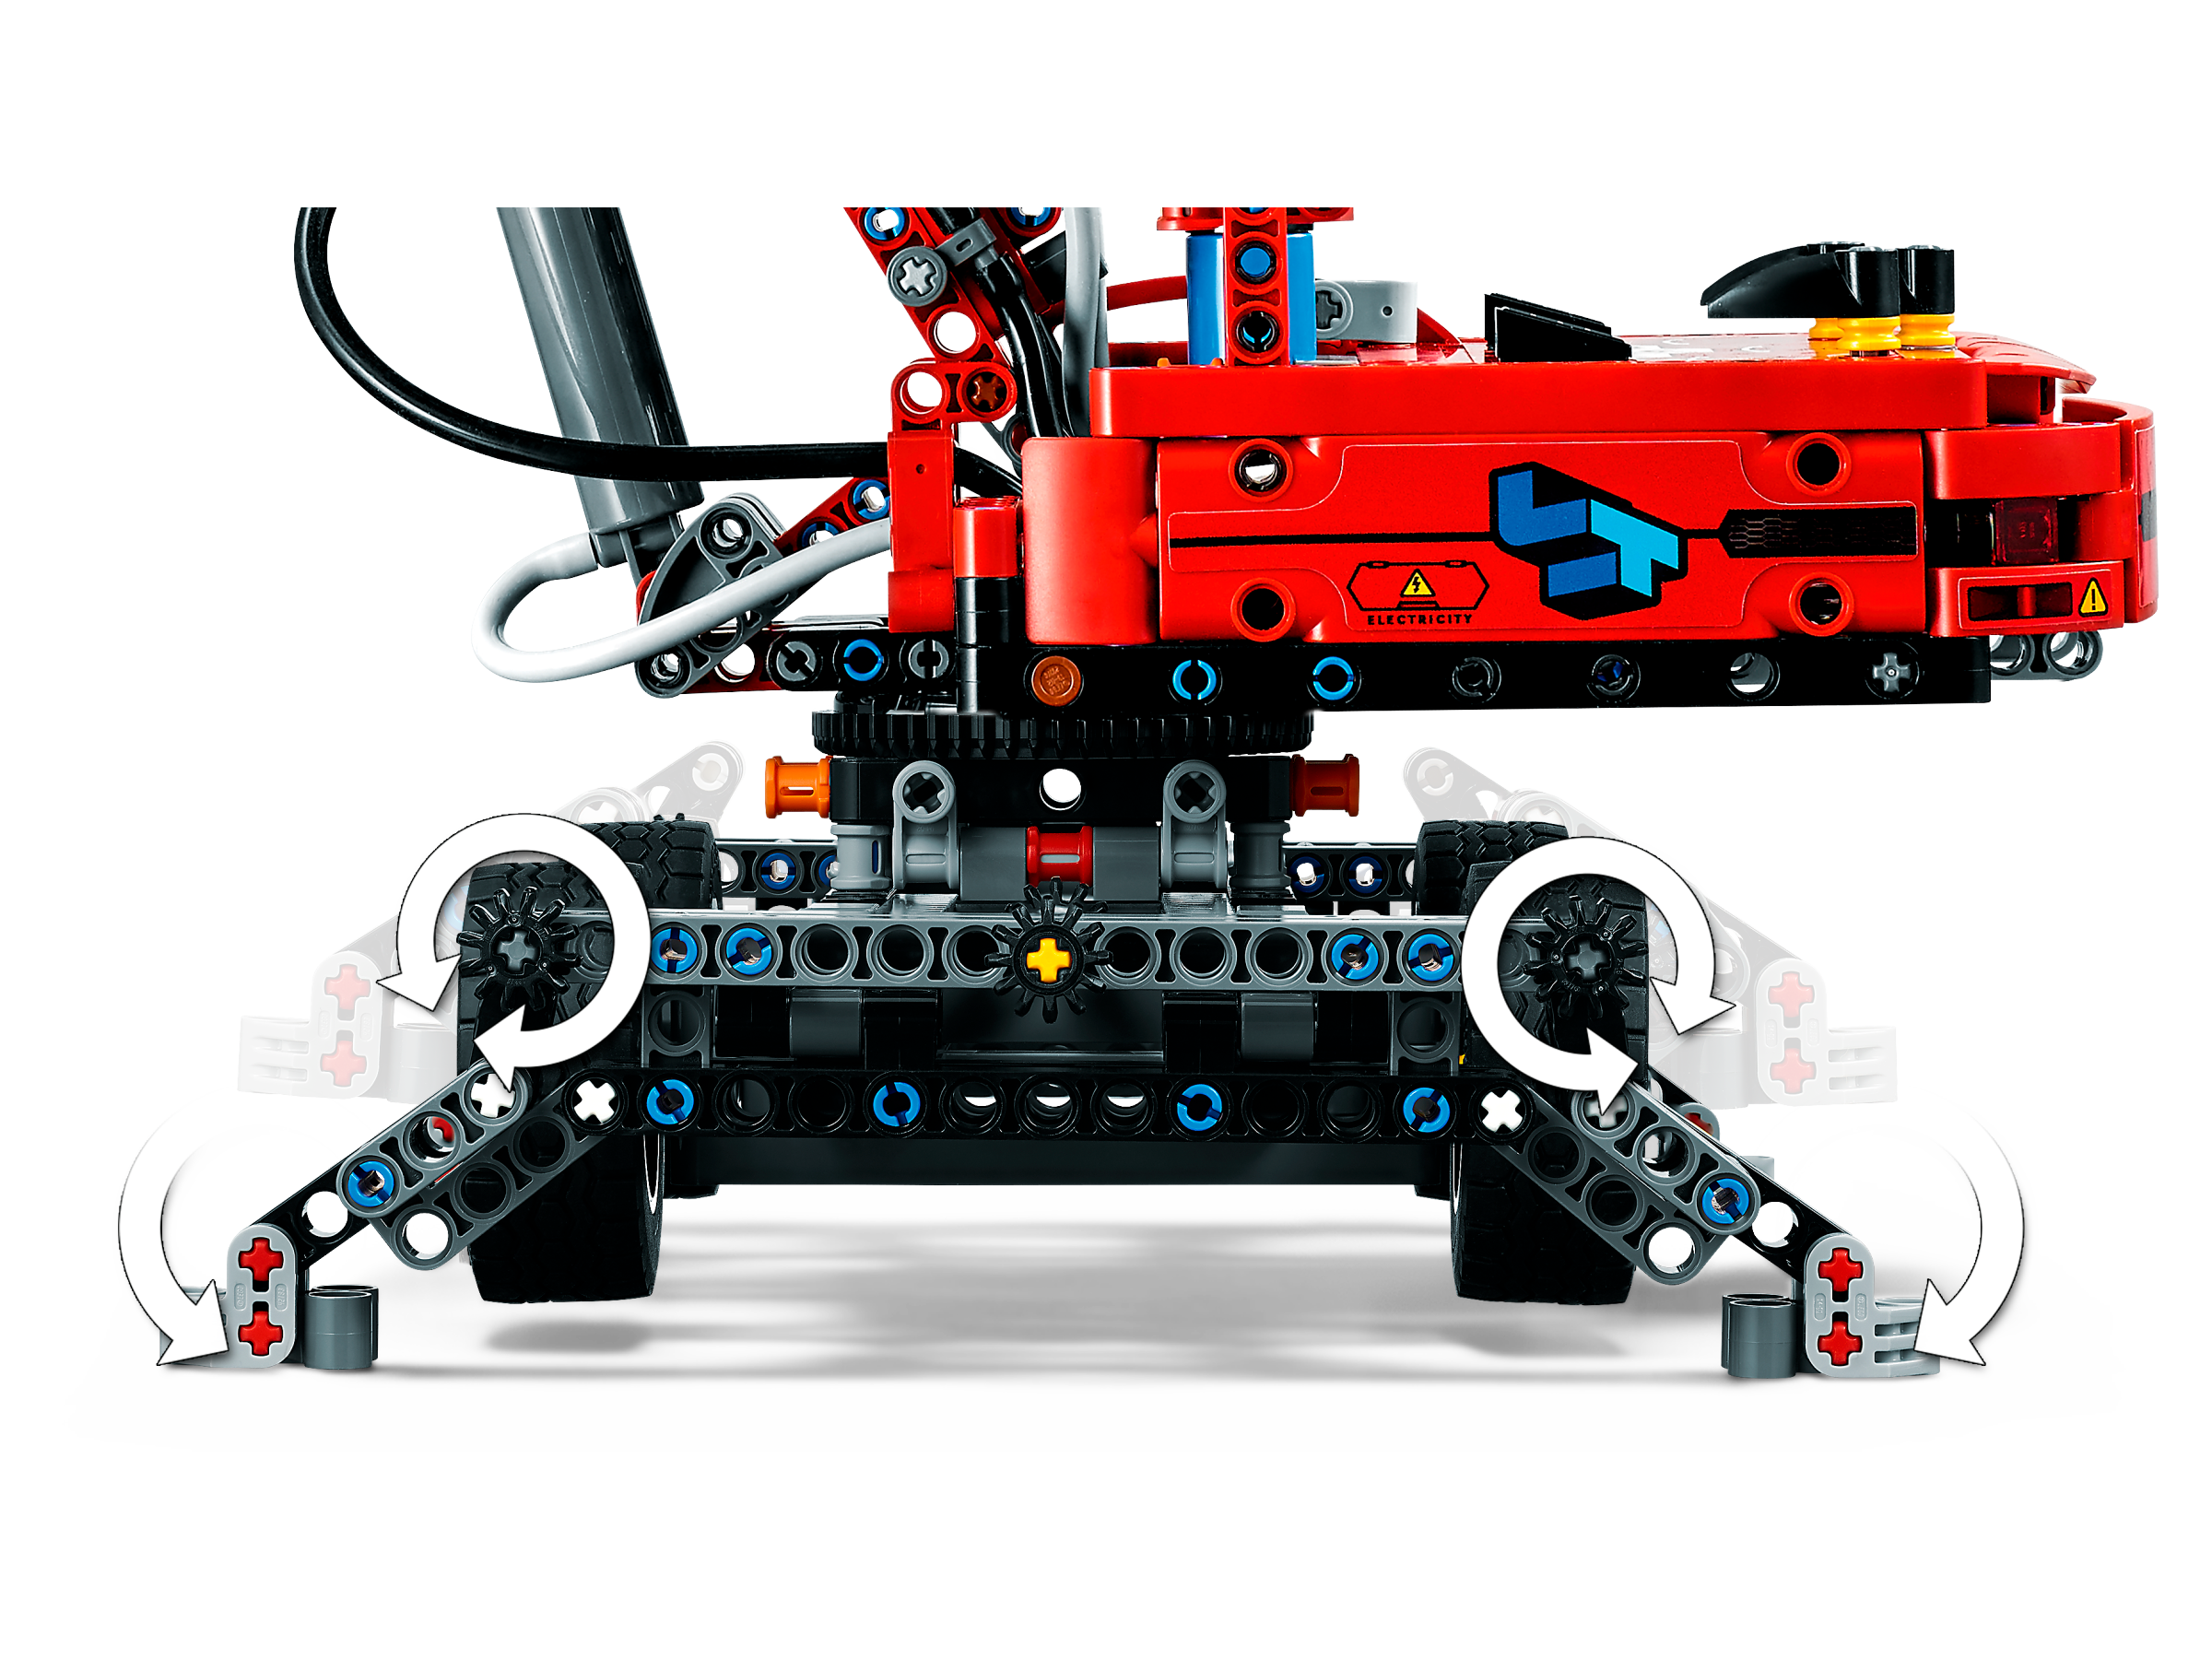 LEGO Technic Material Handler Crane 42144 Building Toy Set for Kids, Boys,  and Girls Ages 10+ (835 Pieces)